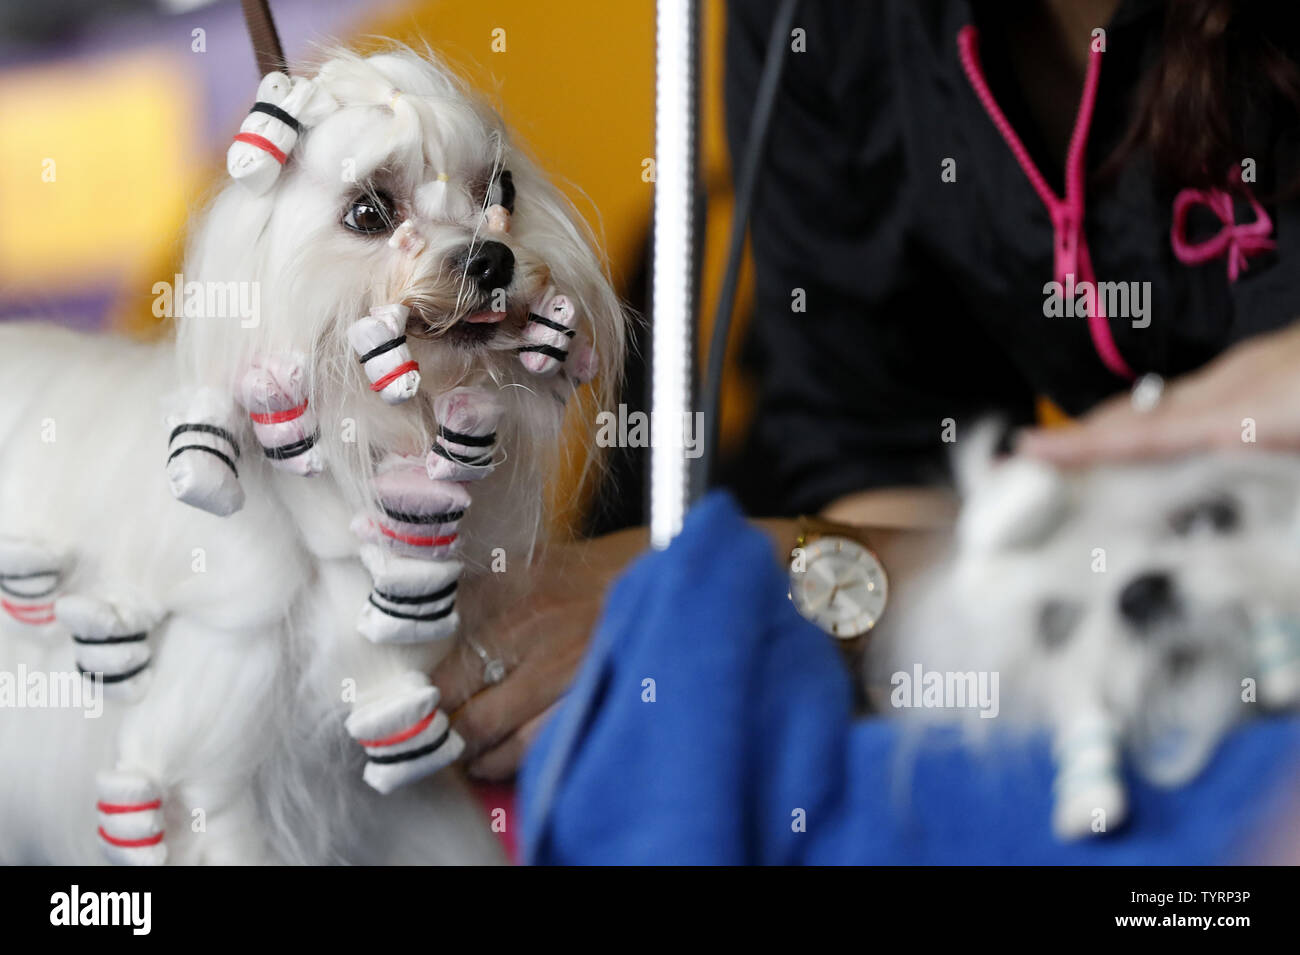 A Maltese gets groomed backstage at best in breed competitions at the 141st Annual Westminster Kennel Club Dog Show st Pier 92 in New York City on February 13, 2017. Three breeds including the American Hairless Terrier, the Pumi and the Sloughi will make their debut this year. Best in show will be decided at Madison Square Garden on Tuesday night. The first Westminster show was held on May 8, 1877, making it the second-longest continuously held sporting event in the United States behind only the Kentucky Derby, which was first held in 1875.     Photo by John Angelillo/UPI Stock Photo